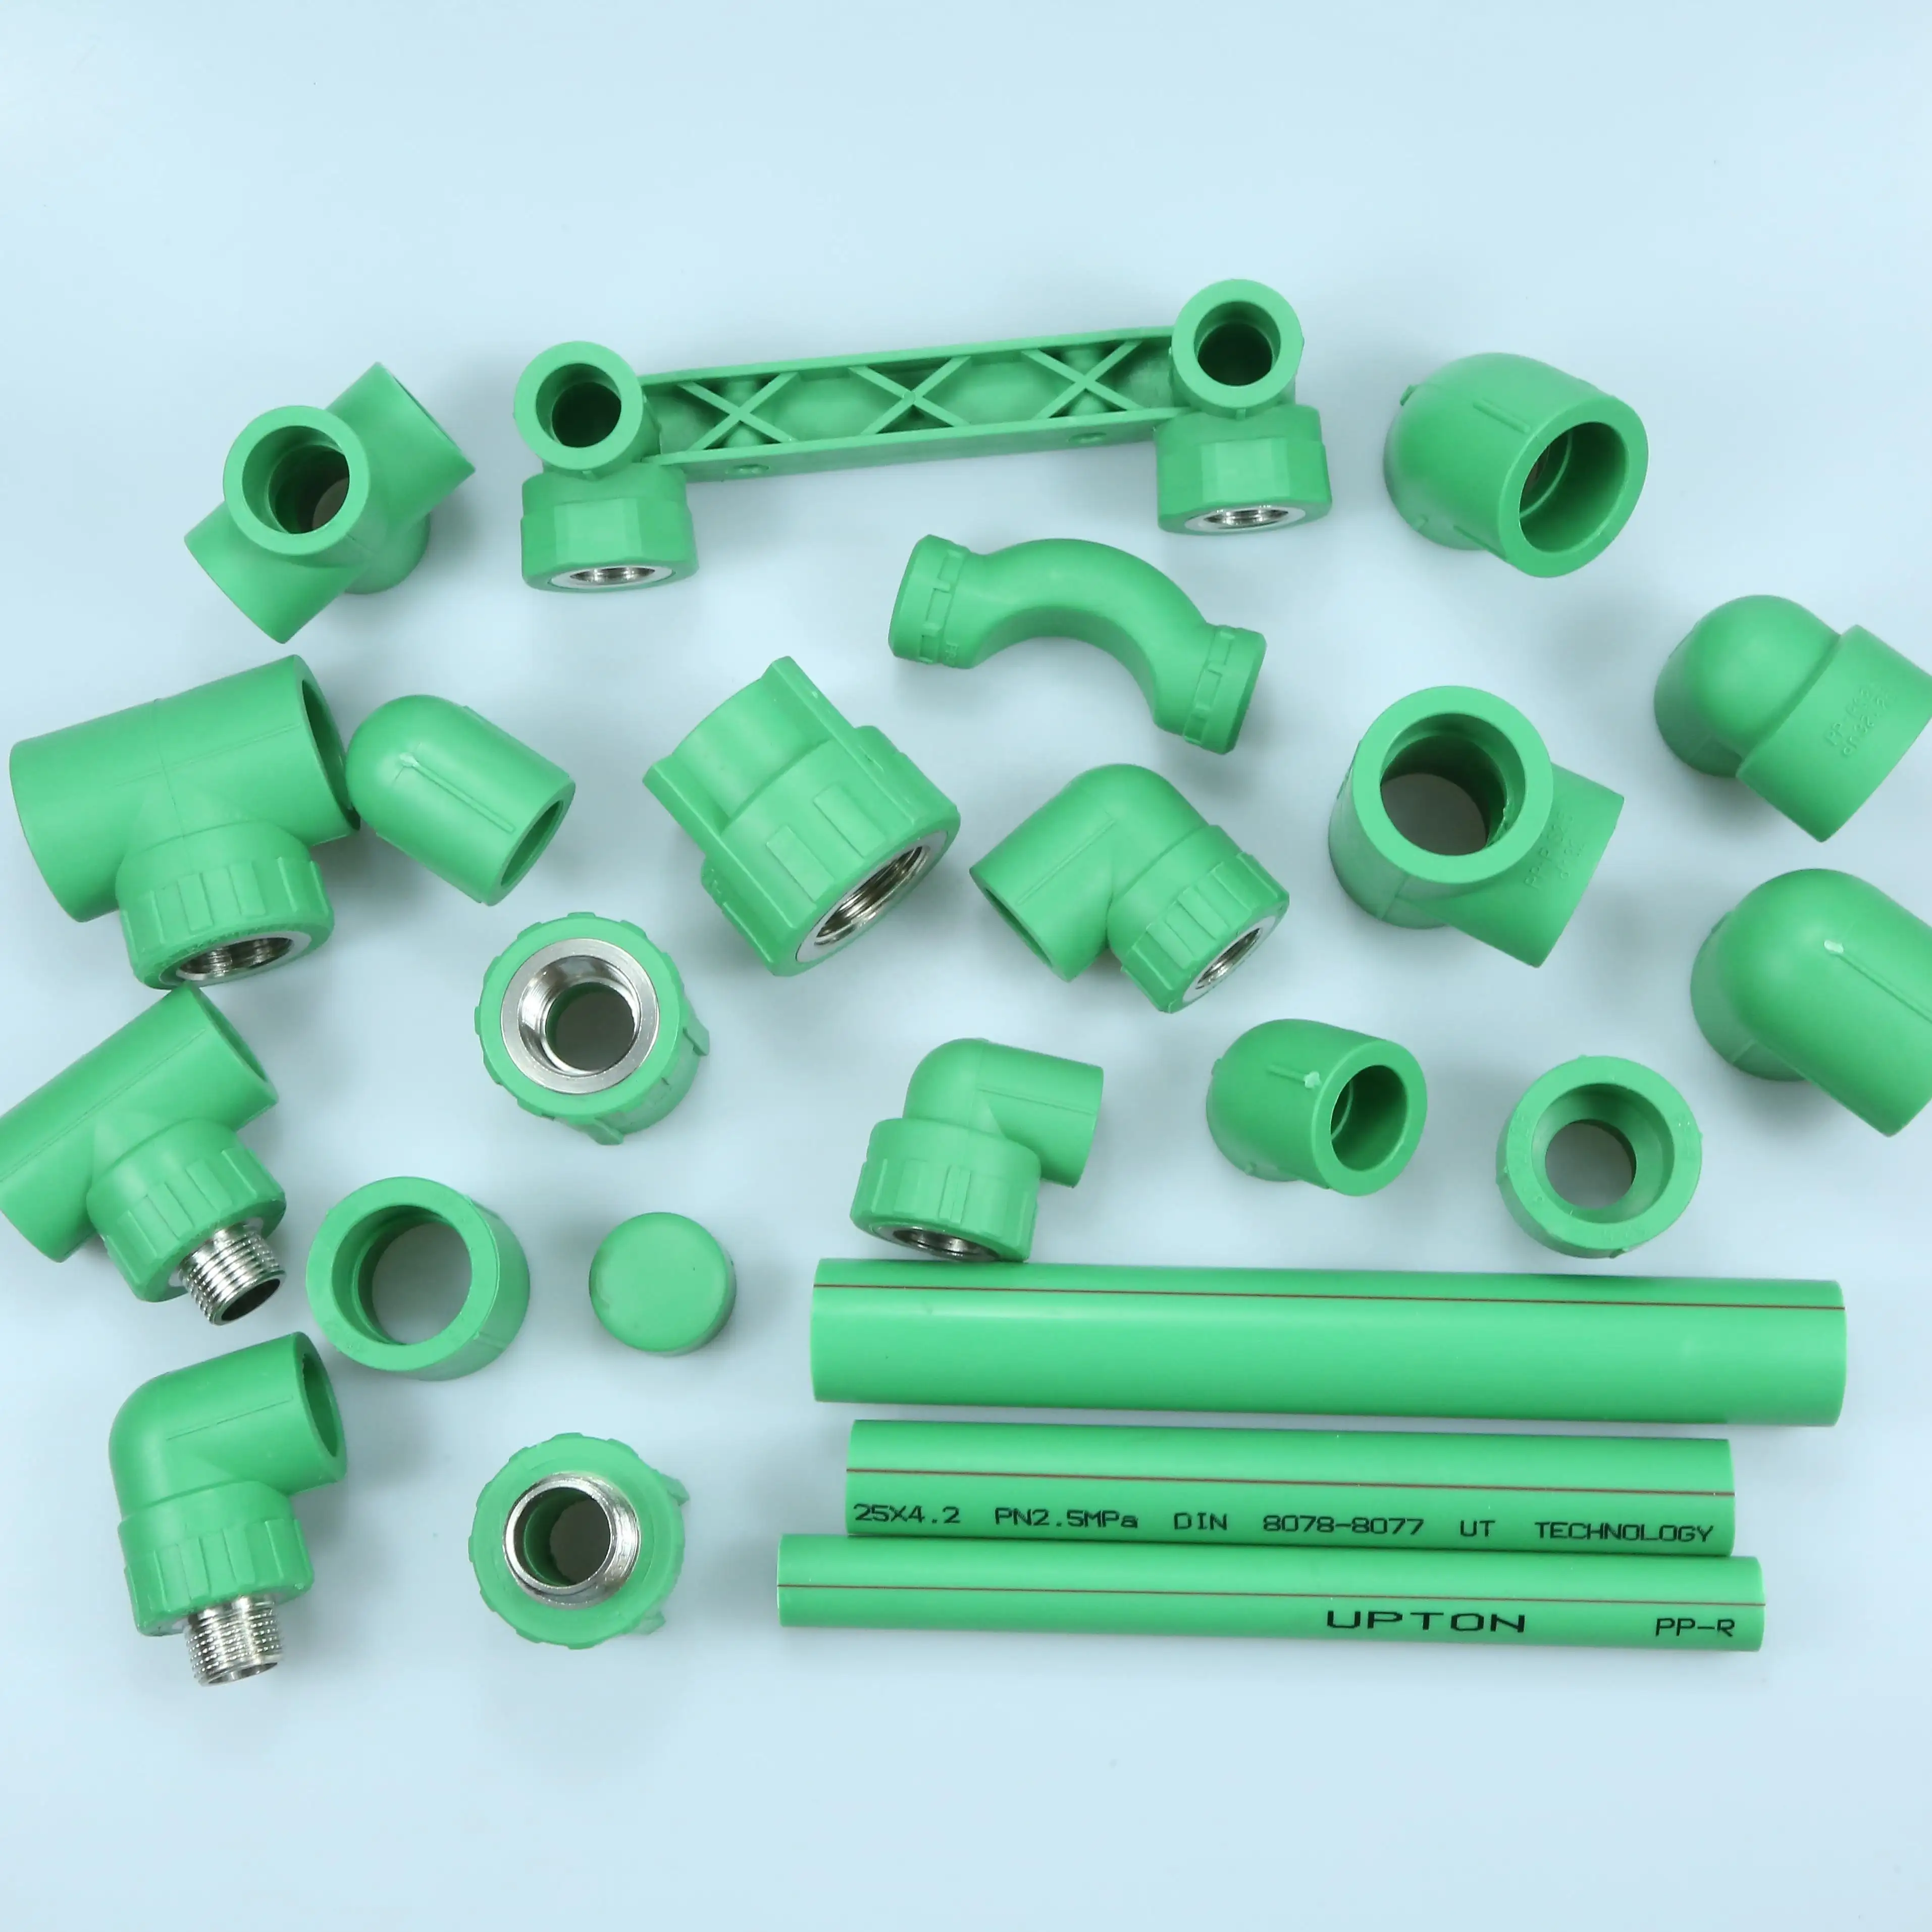 Standard Water Threaded Plastic Pex Composite Plumbing Ppr Pipe Pp-r Fittings Gate Connector Suppliers Seated Degree Elbow